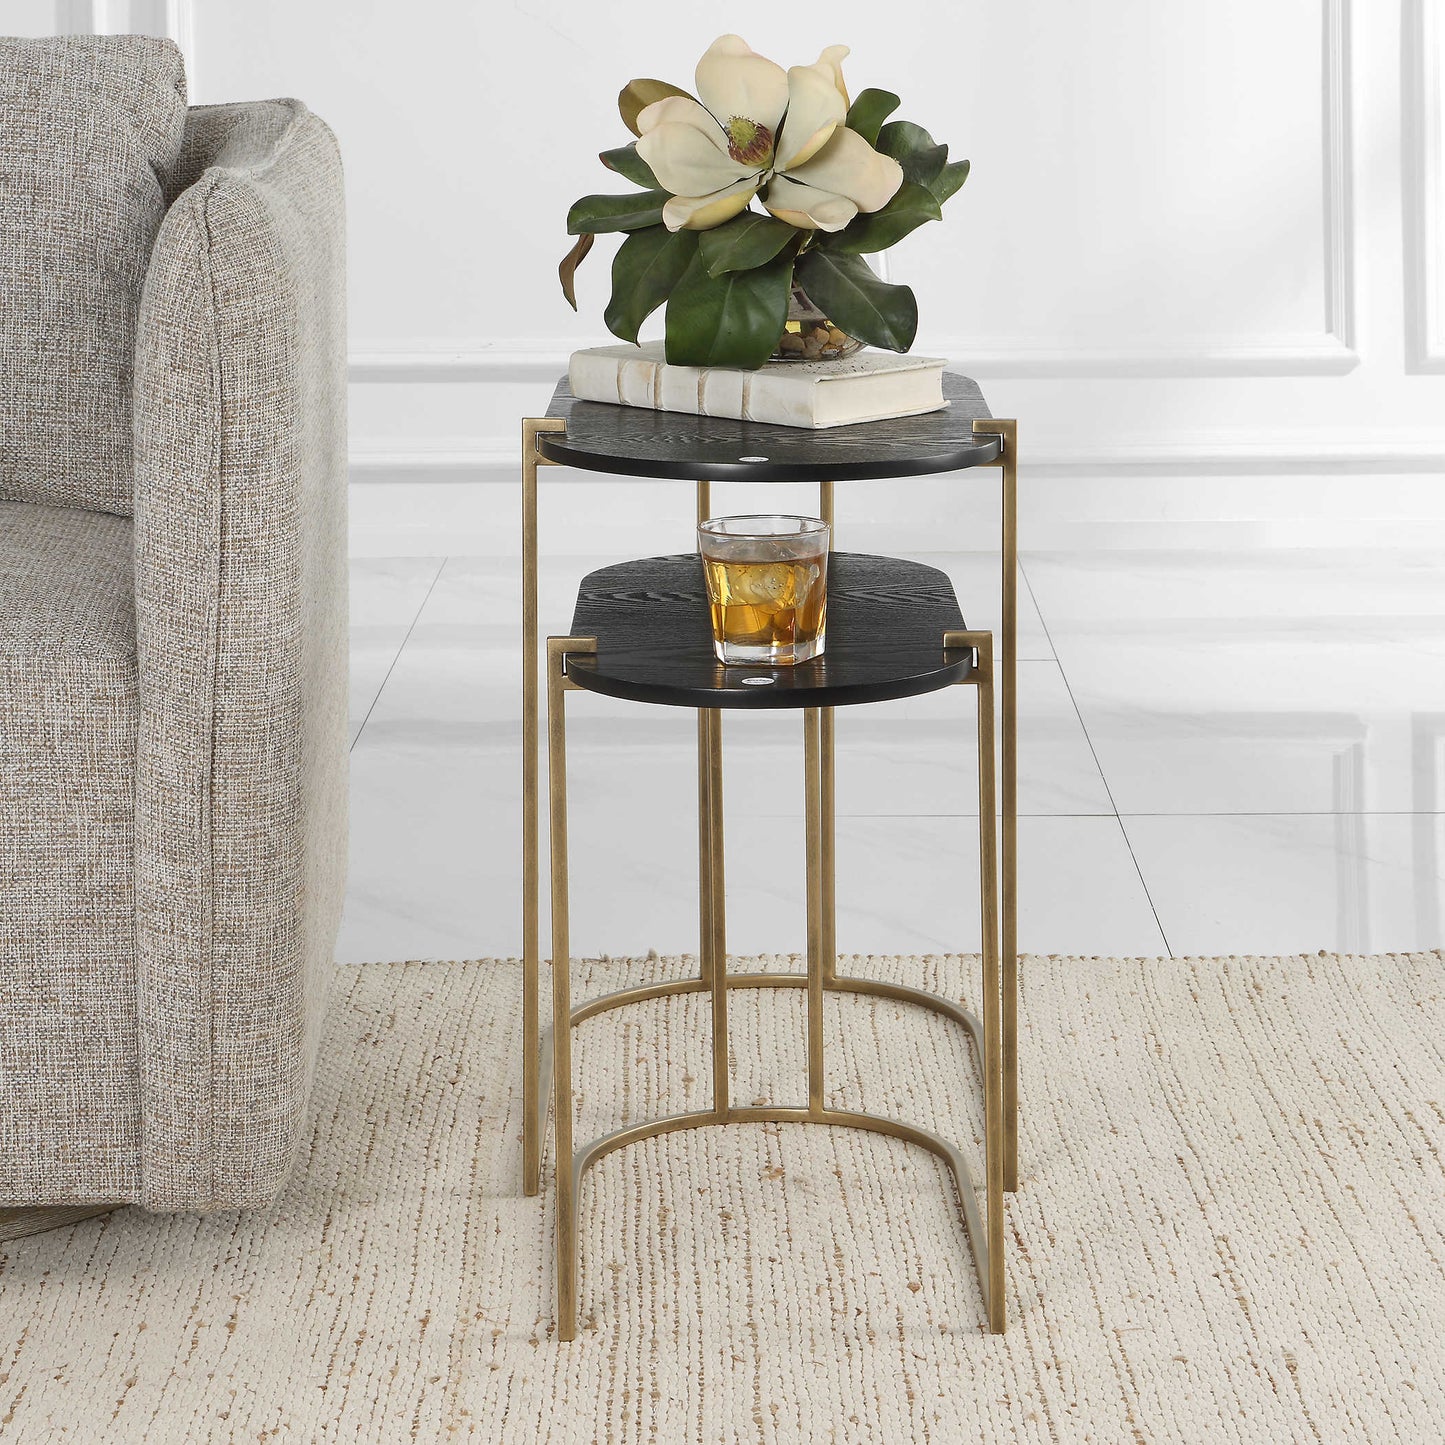 Black and Brass Oval Nesting Table